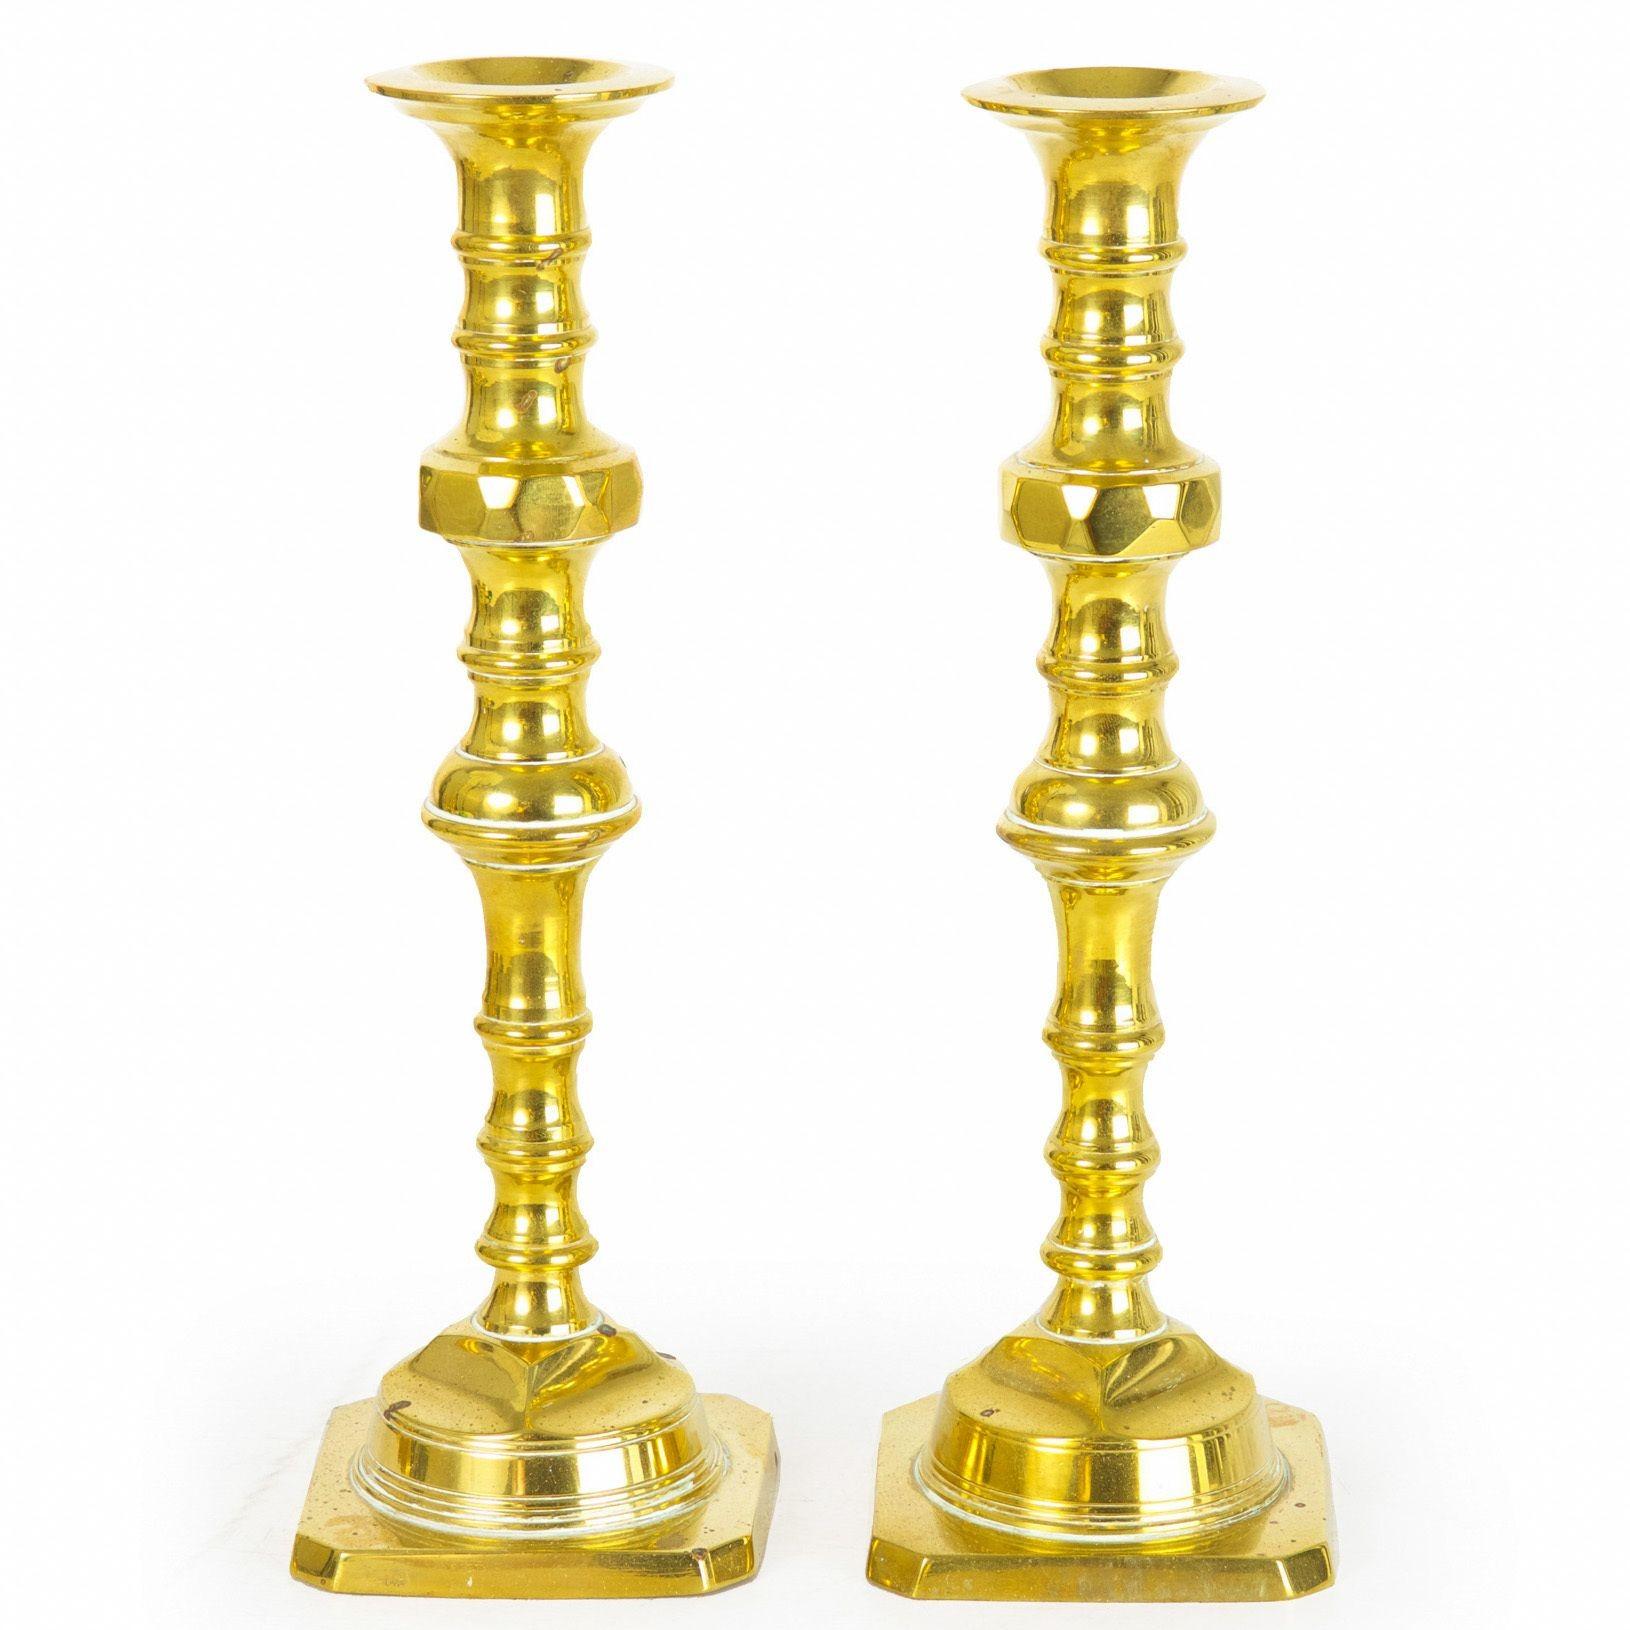 A most attractive pair of English candlesticks in the Neoclassical taste from the late 19th century, they are crafted of solid brass that has been beautifully hand-turned with a series of ring-turnings, a swollen baluster and an upper faceted